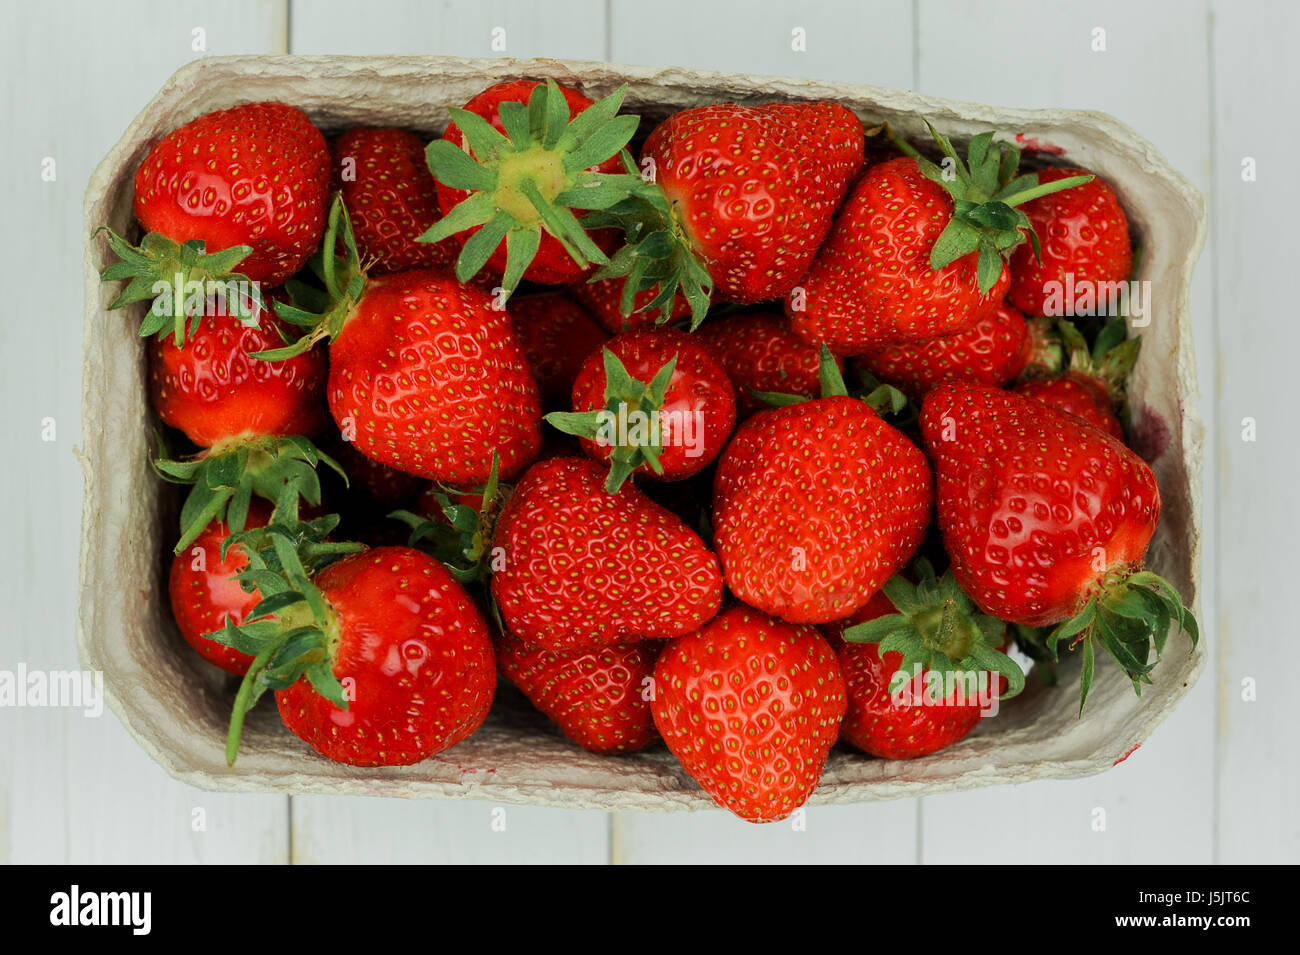 Strawberries in a basket on wooden whitstable, top view Stock Photo